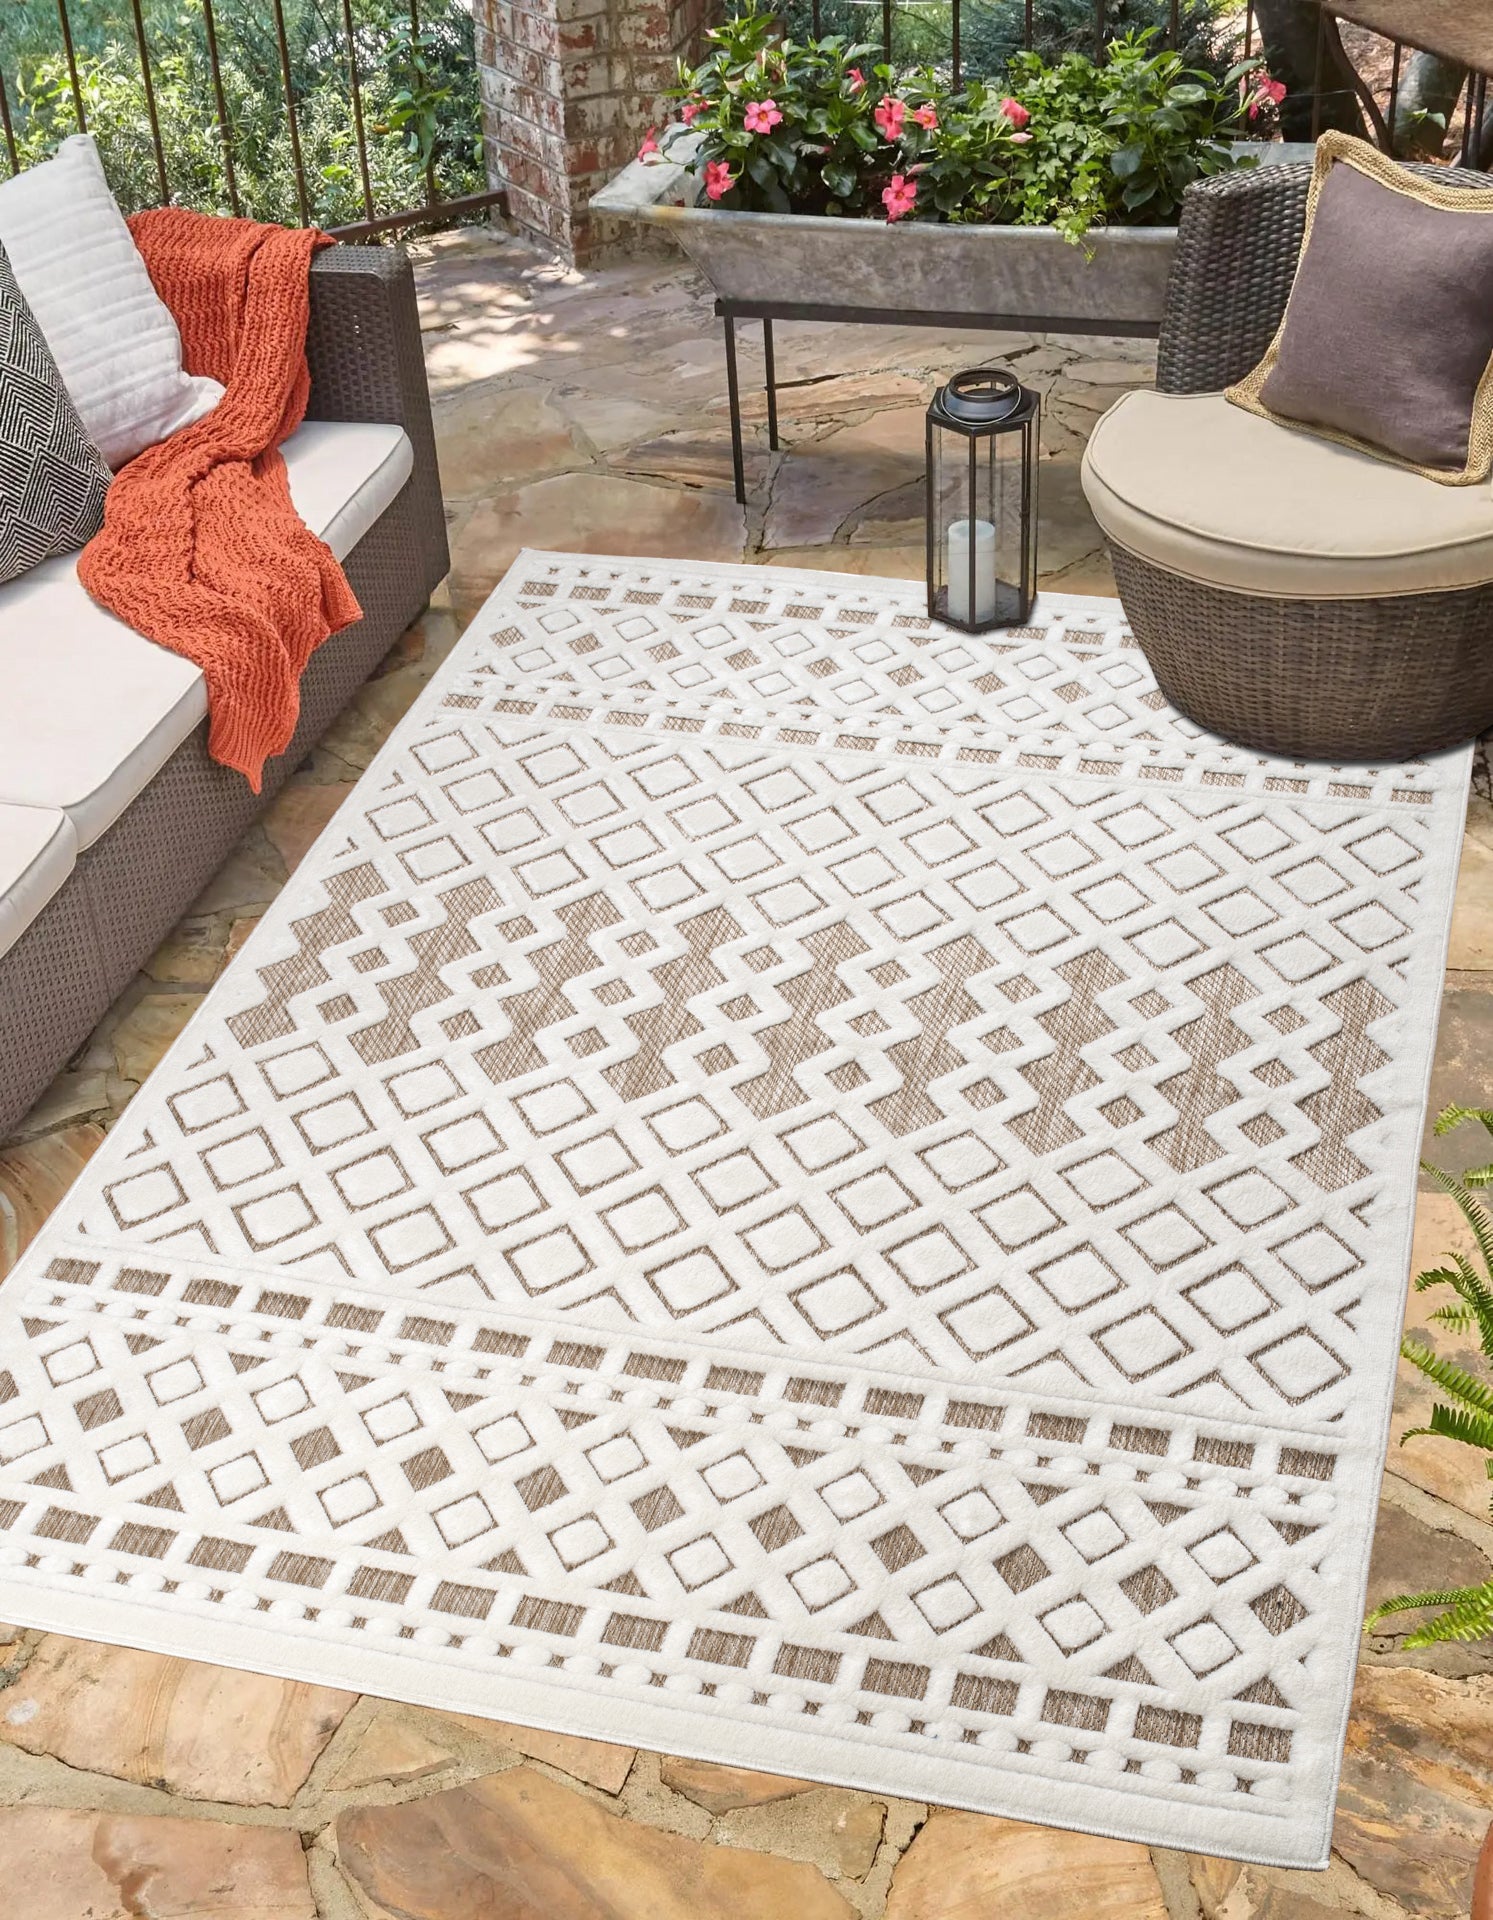 geometric modern contemporary outdoor indoor area rug carpet for patio porch dining area balcony living room bedroom 2x8, 3x10, 2x10 ft Long Runner Rug, Hallway, Balcony, Entry Way, Kitchen, Stairs